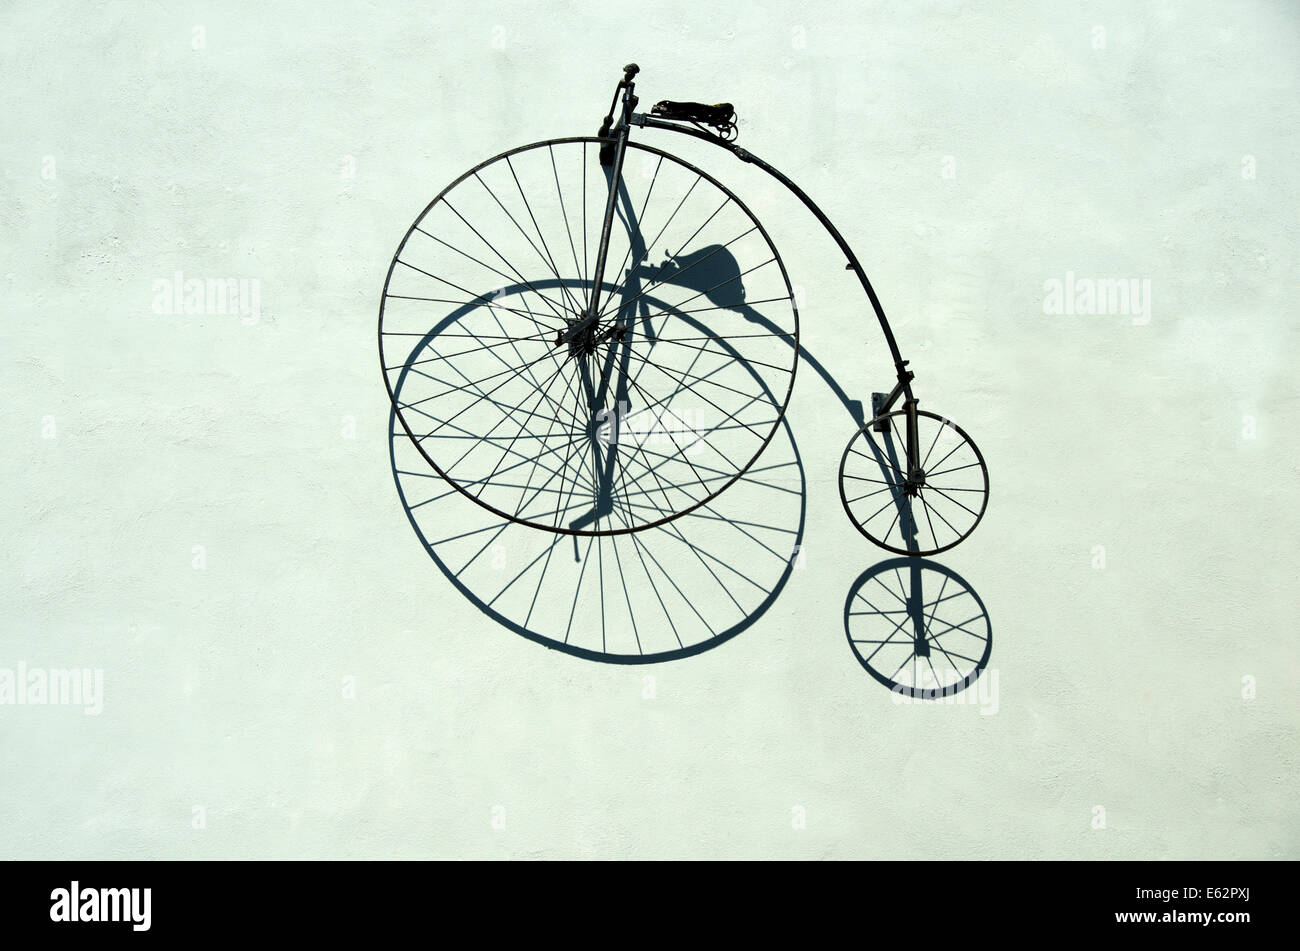 Penny-farthing bicycle. Stock Photo